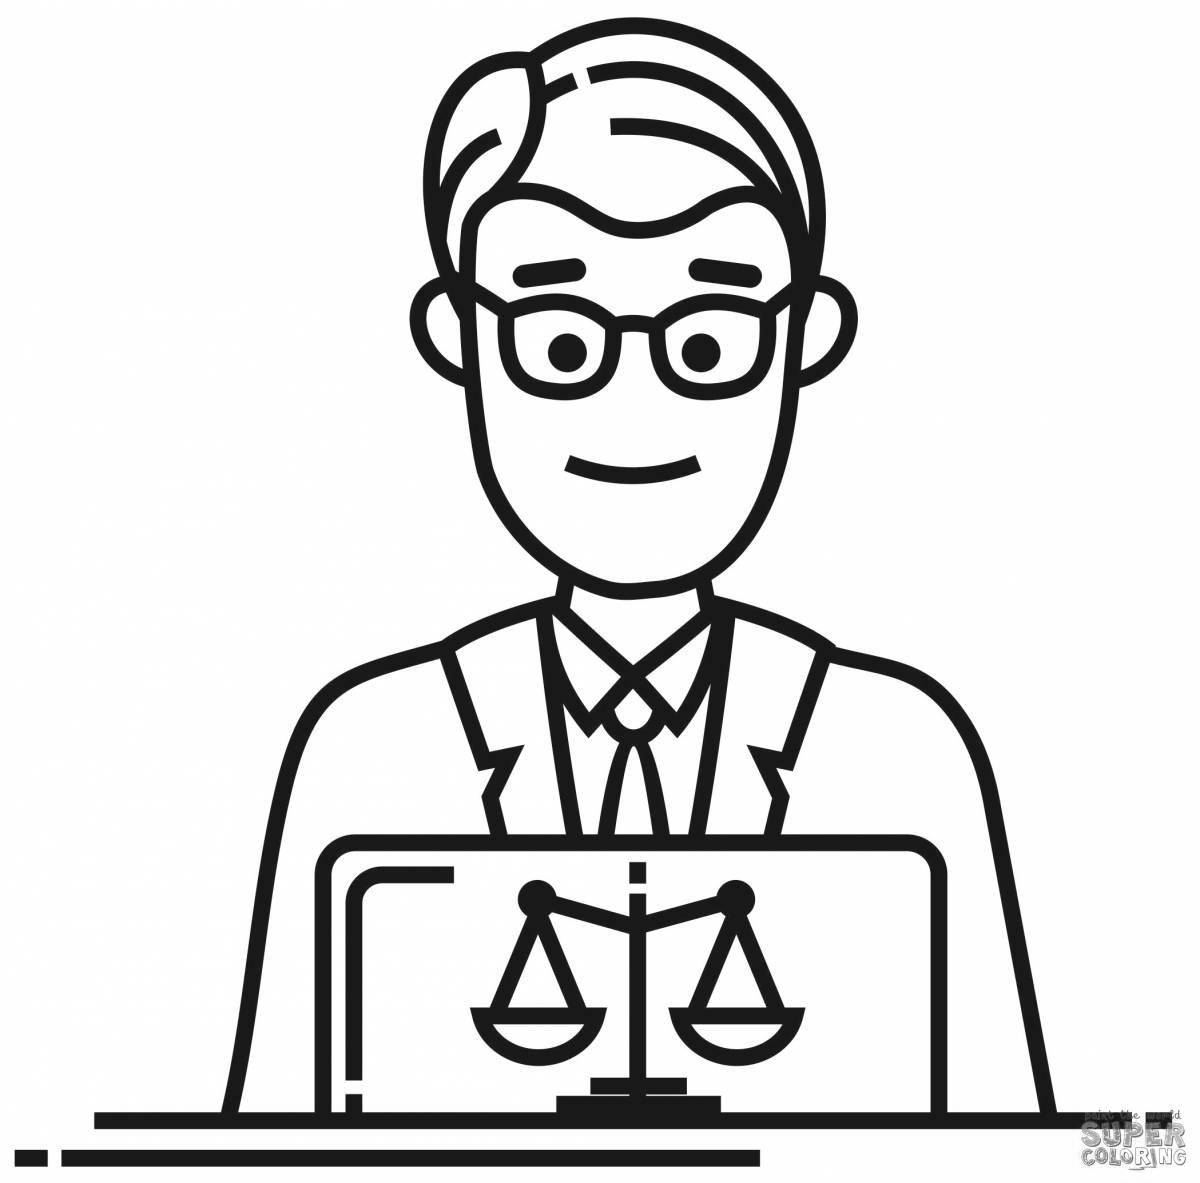 Coloring book playful lawyer